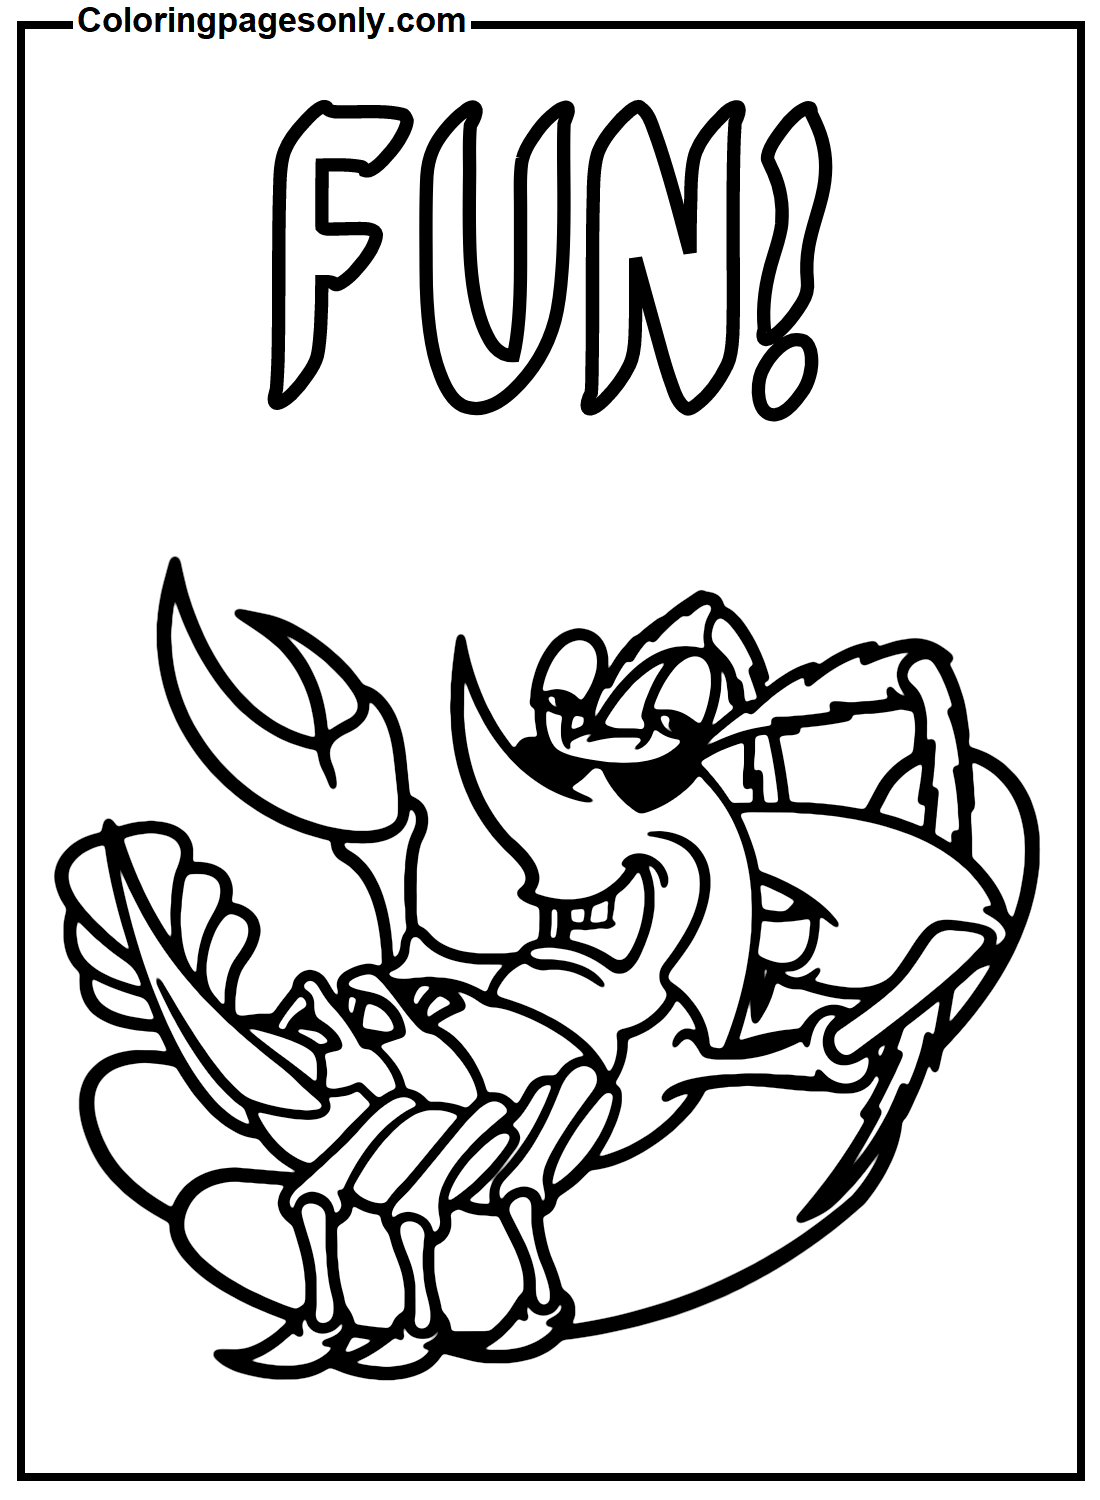 Shrimp Hot Dogs Coloring Pages